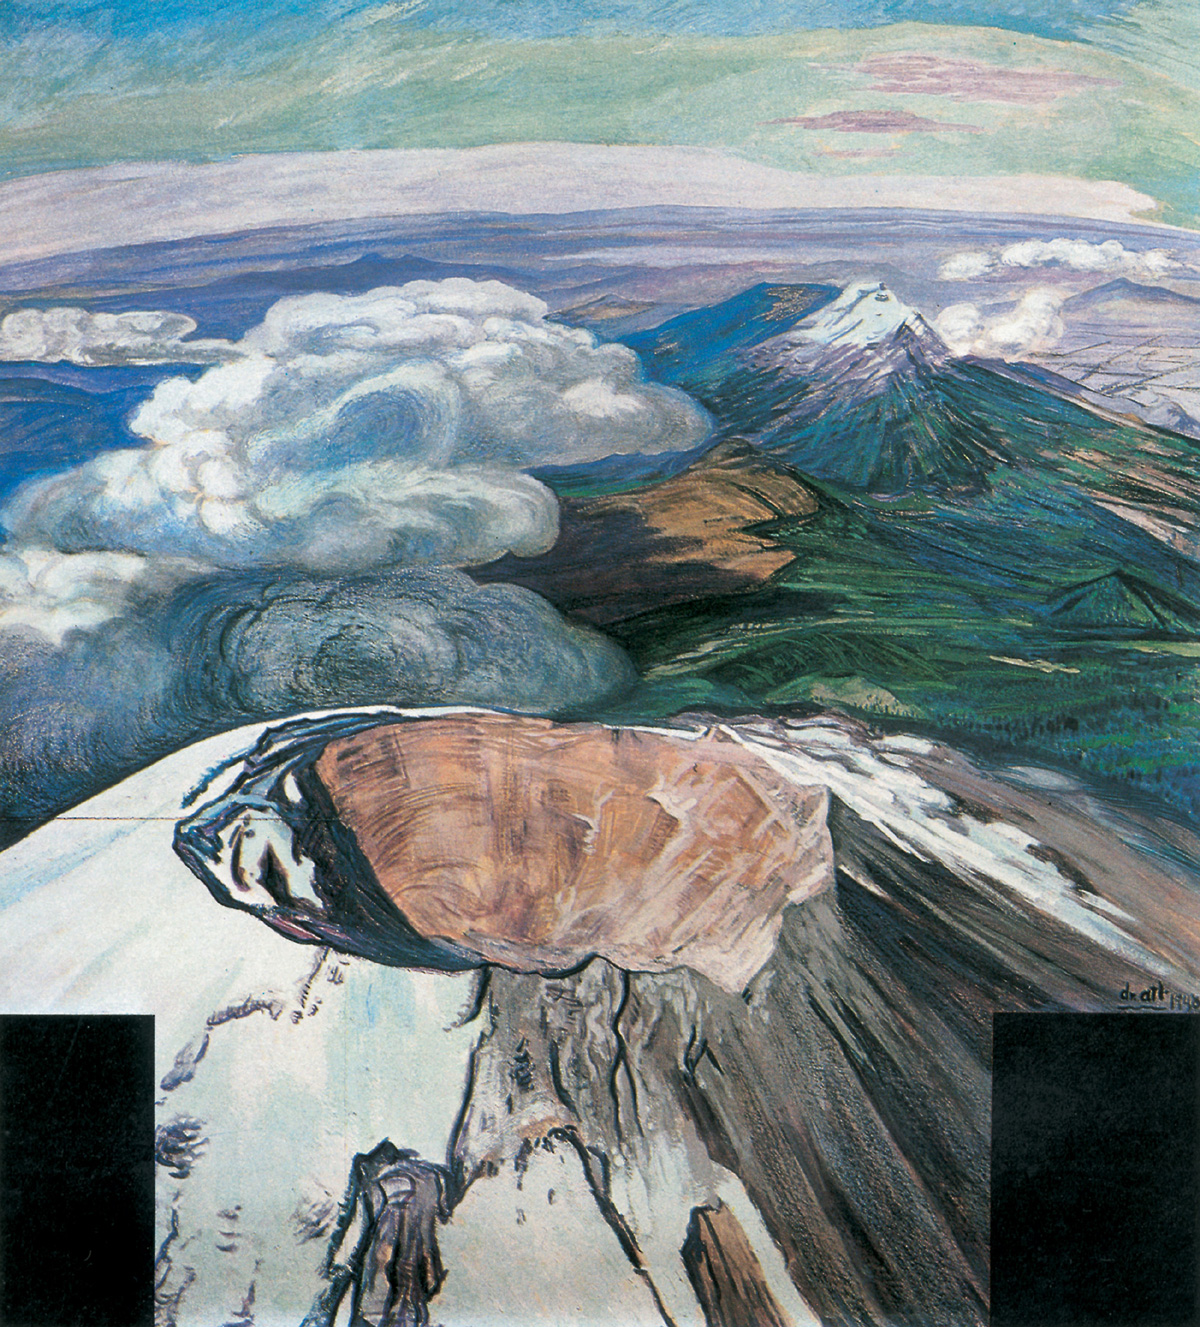 Artist Dr. Atl's 1948 oil and pastel drawing of a volcano crater, titled 